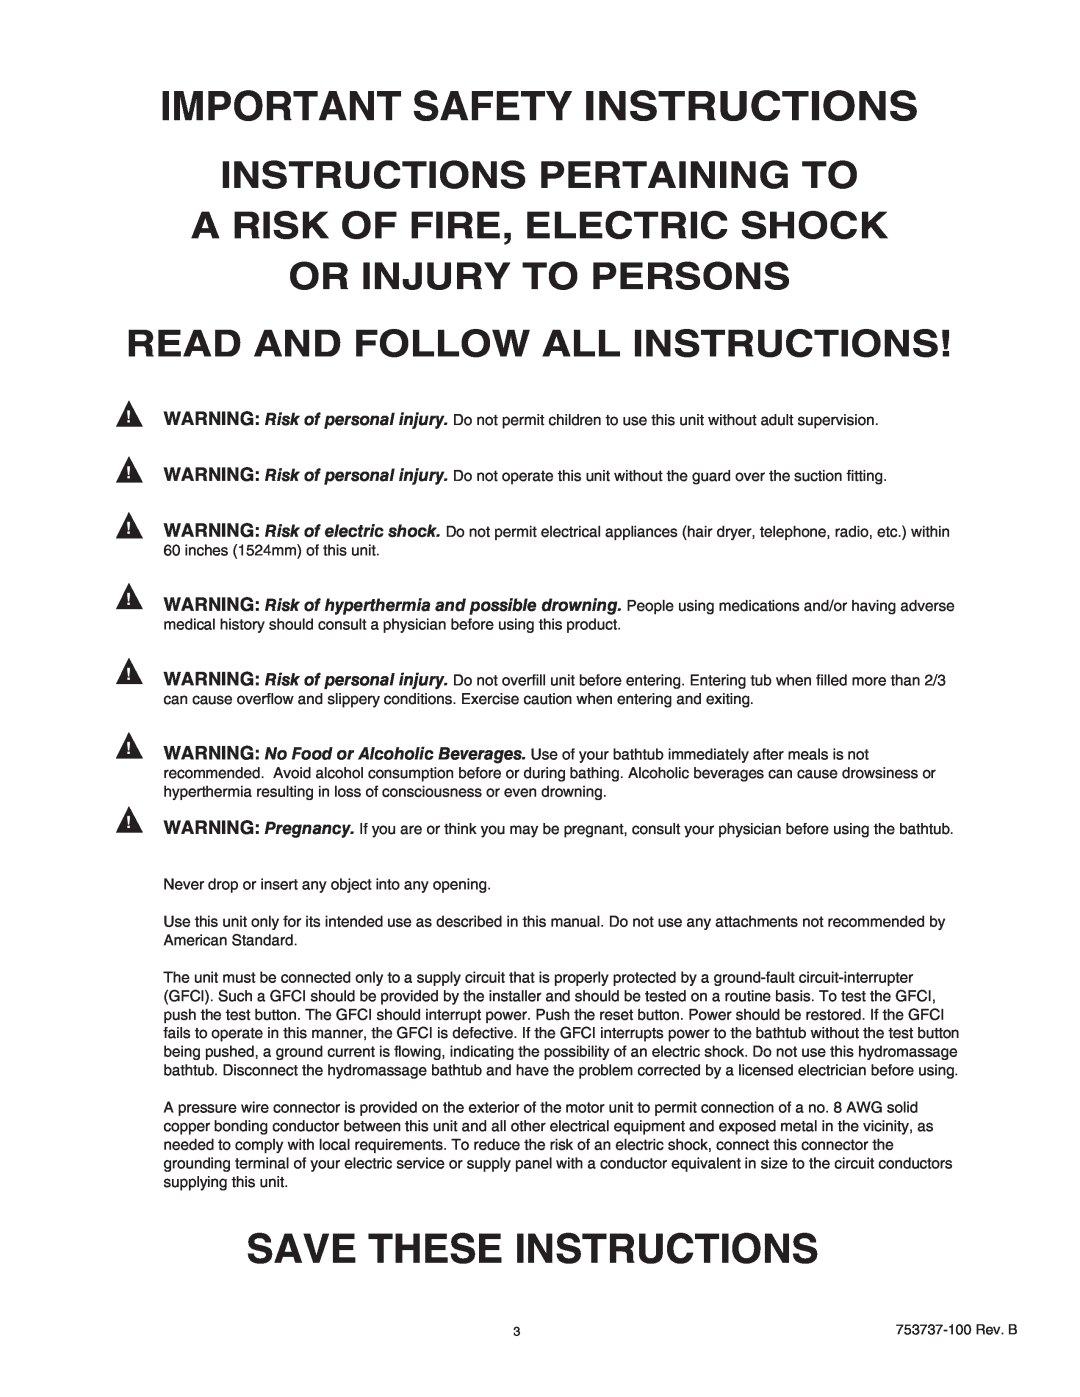 American Standard 2771VA manual Important Safety Instructions, Save These Instructions, Read And Follow All Instructions 